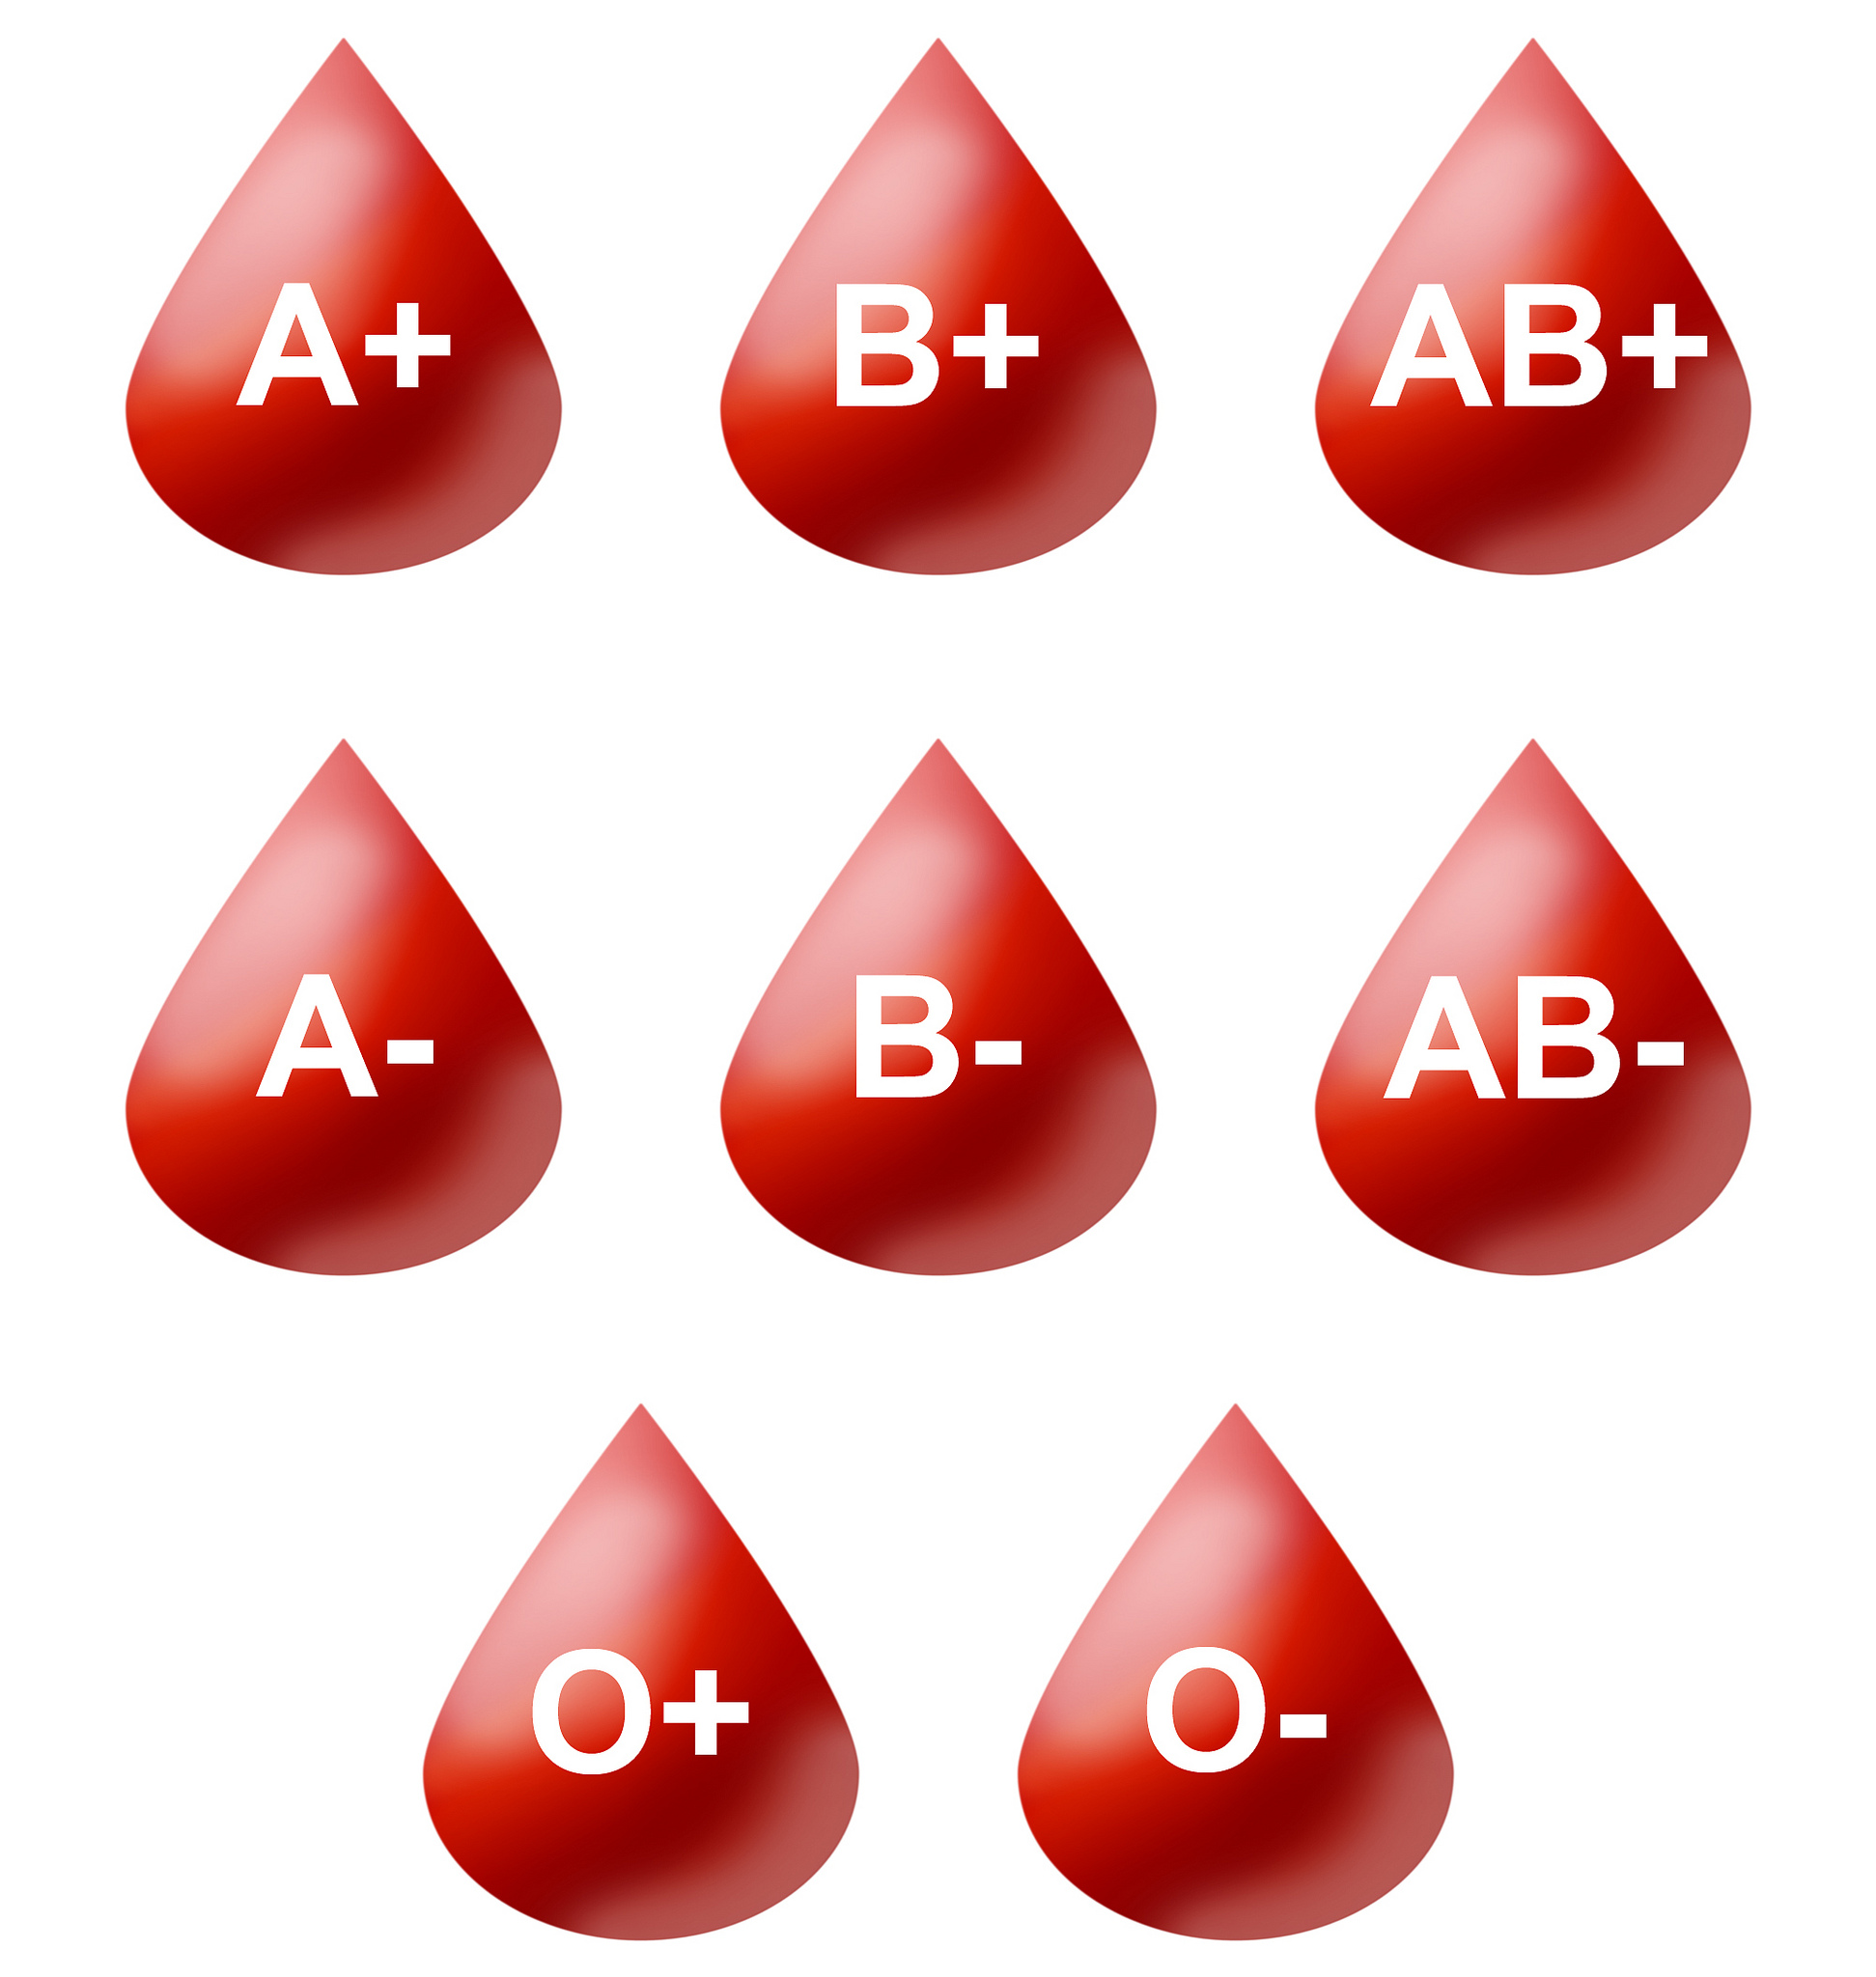 https://www.science.org.au/curious/sites/default/files/images/ptcaa6-blood-types1.jpg